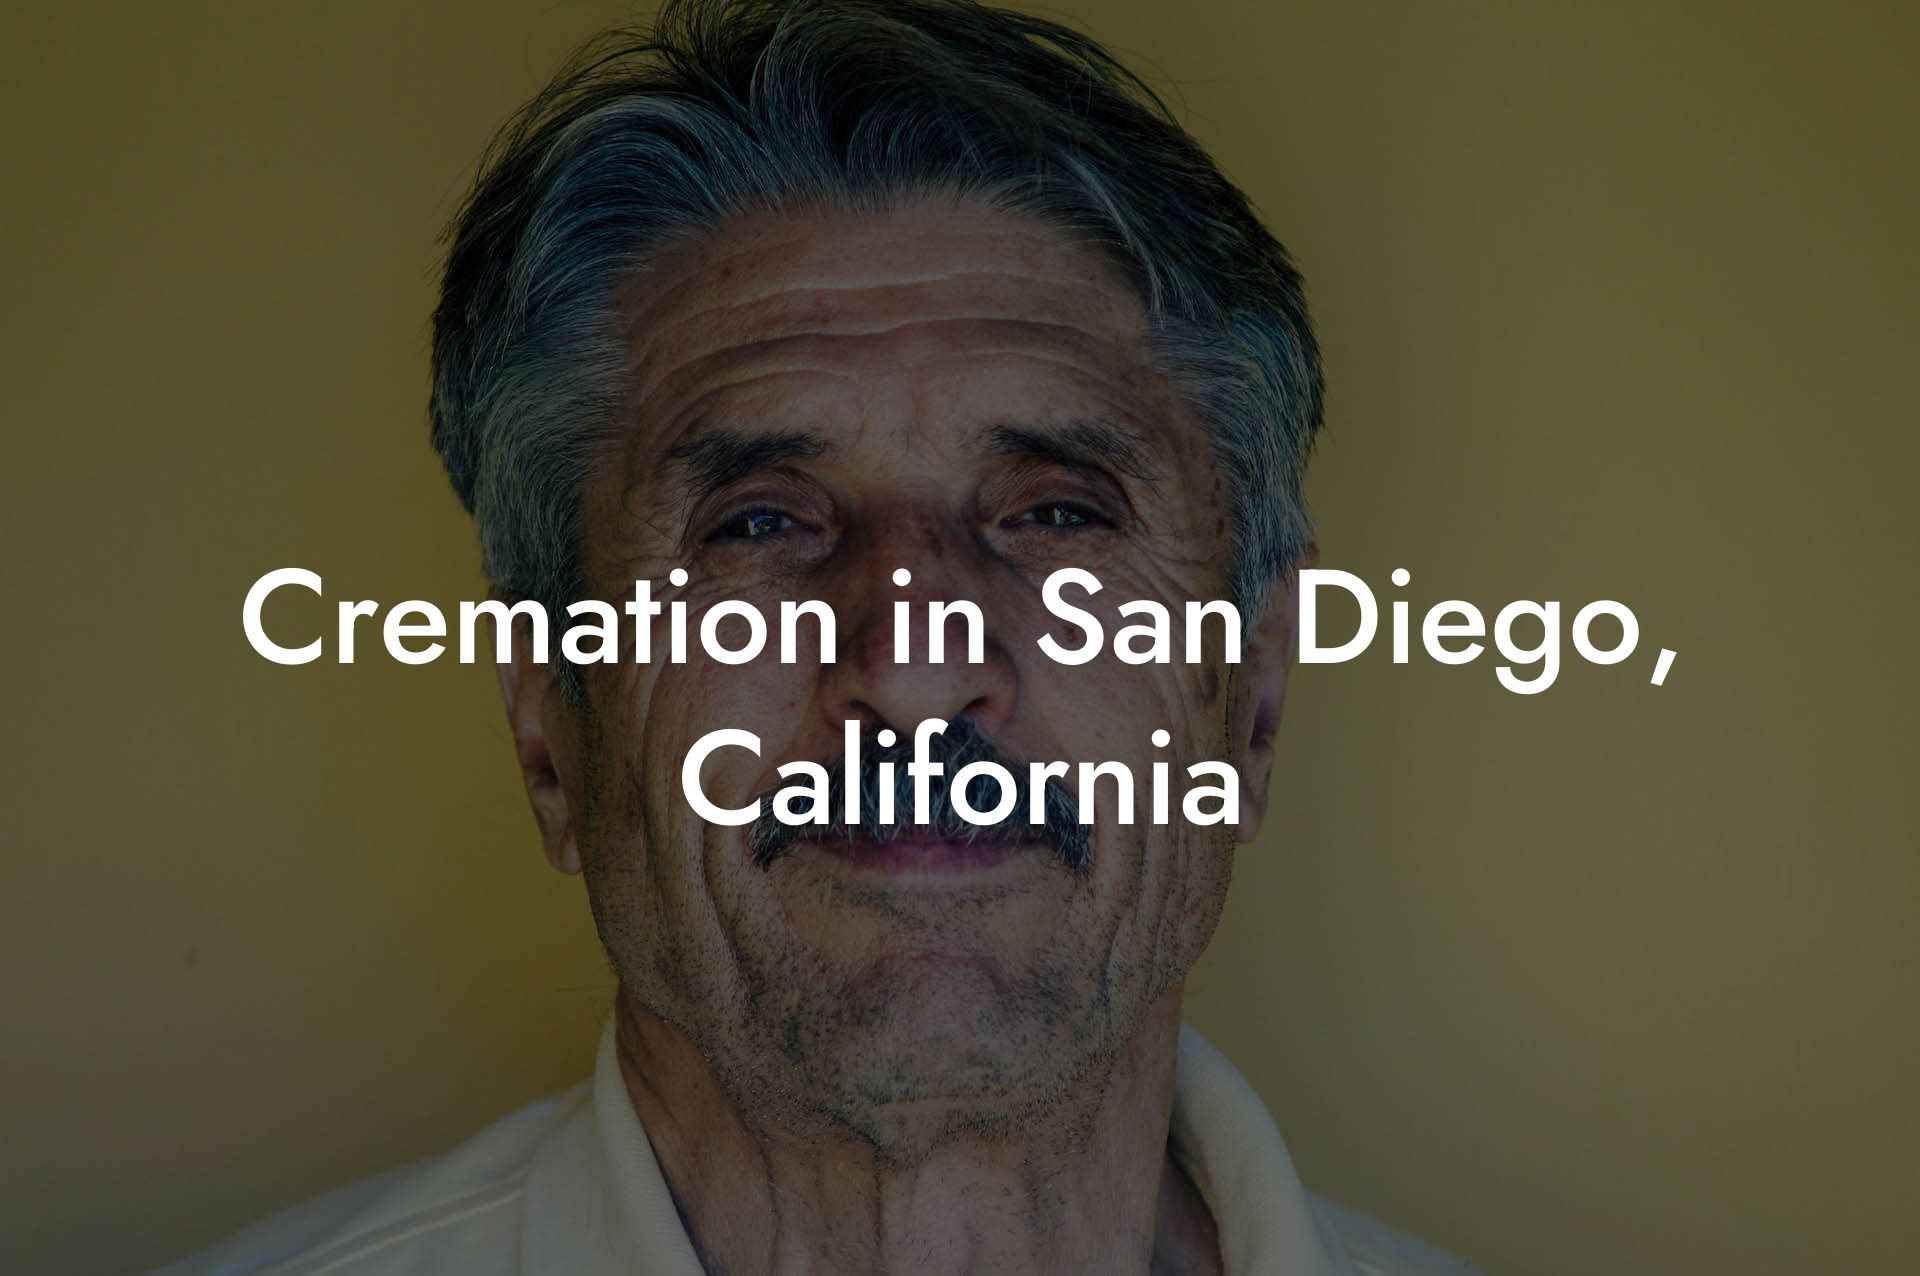 Cremation in San Diego, California